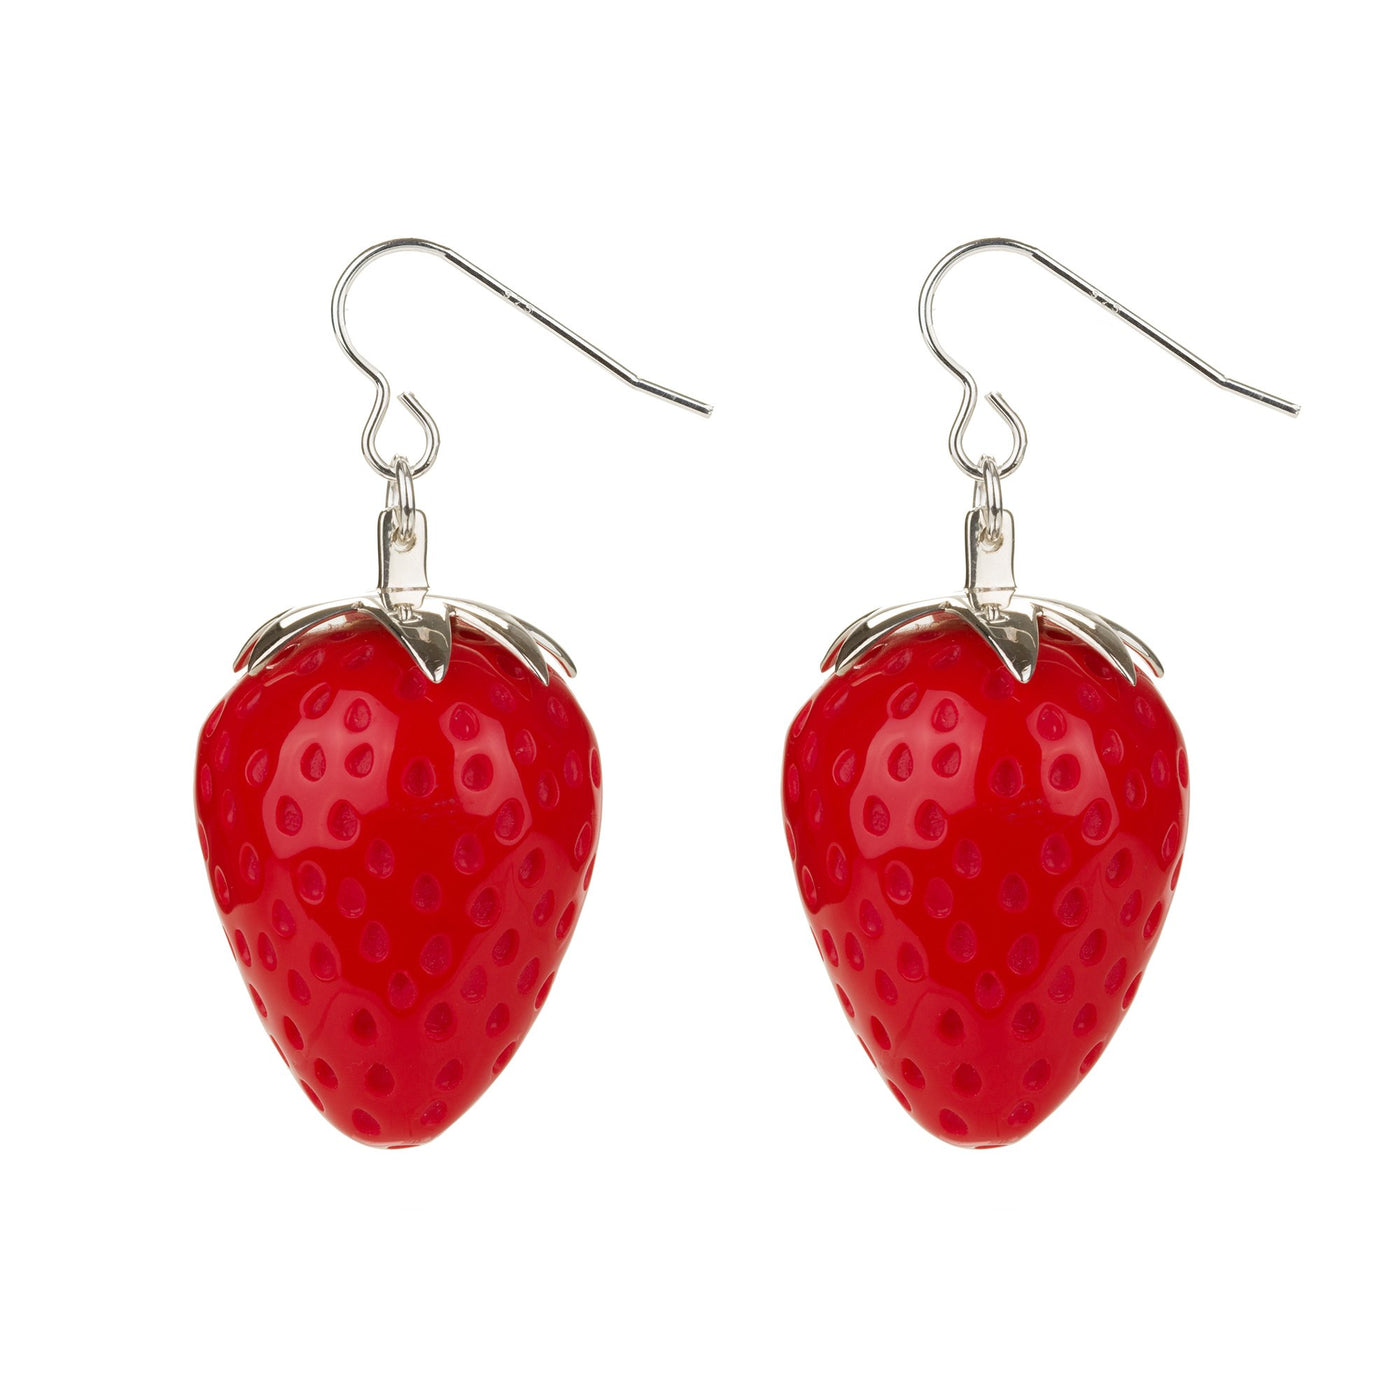 Tina Lilienthal Strawberry Earrings